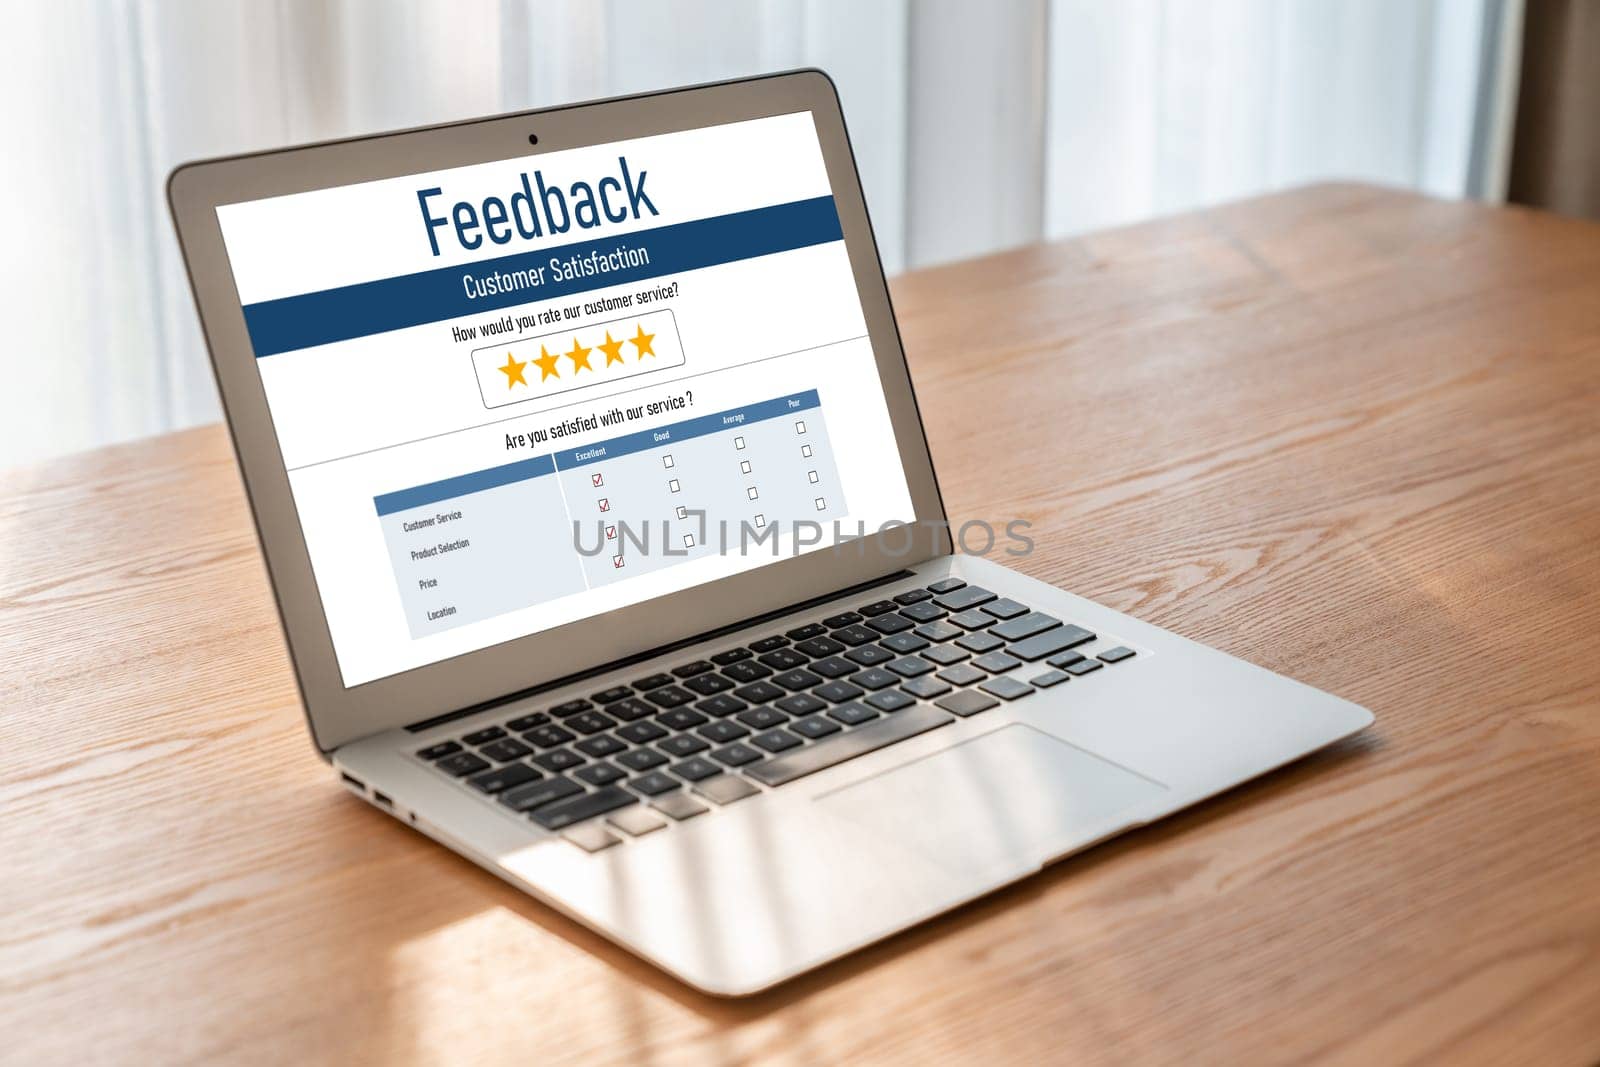 Customer feedback and review analysis by modish computer software by biancoblue